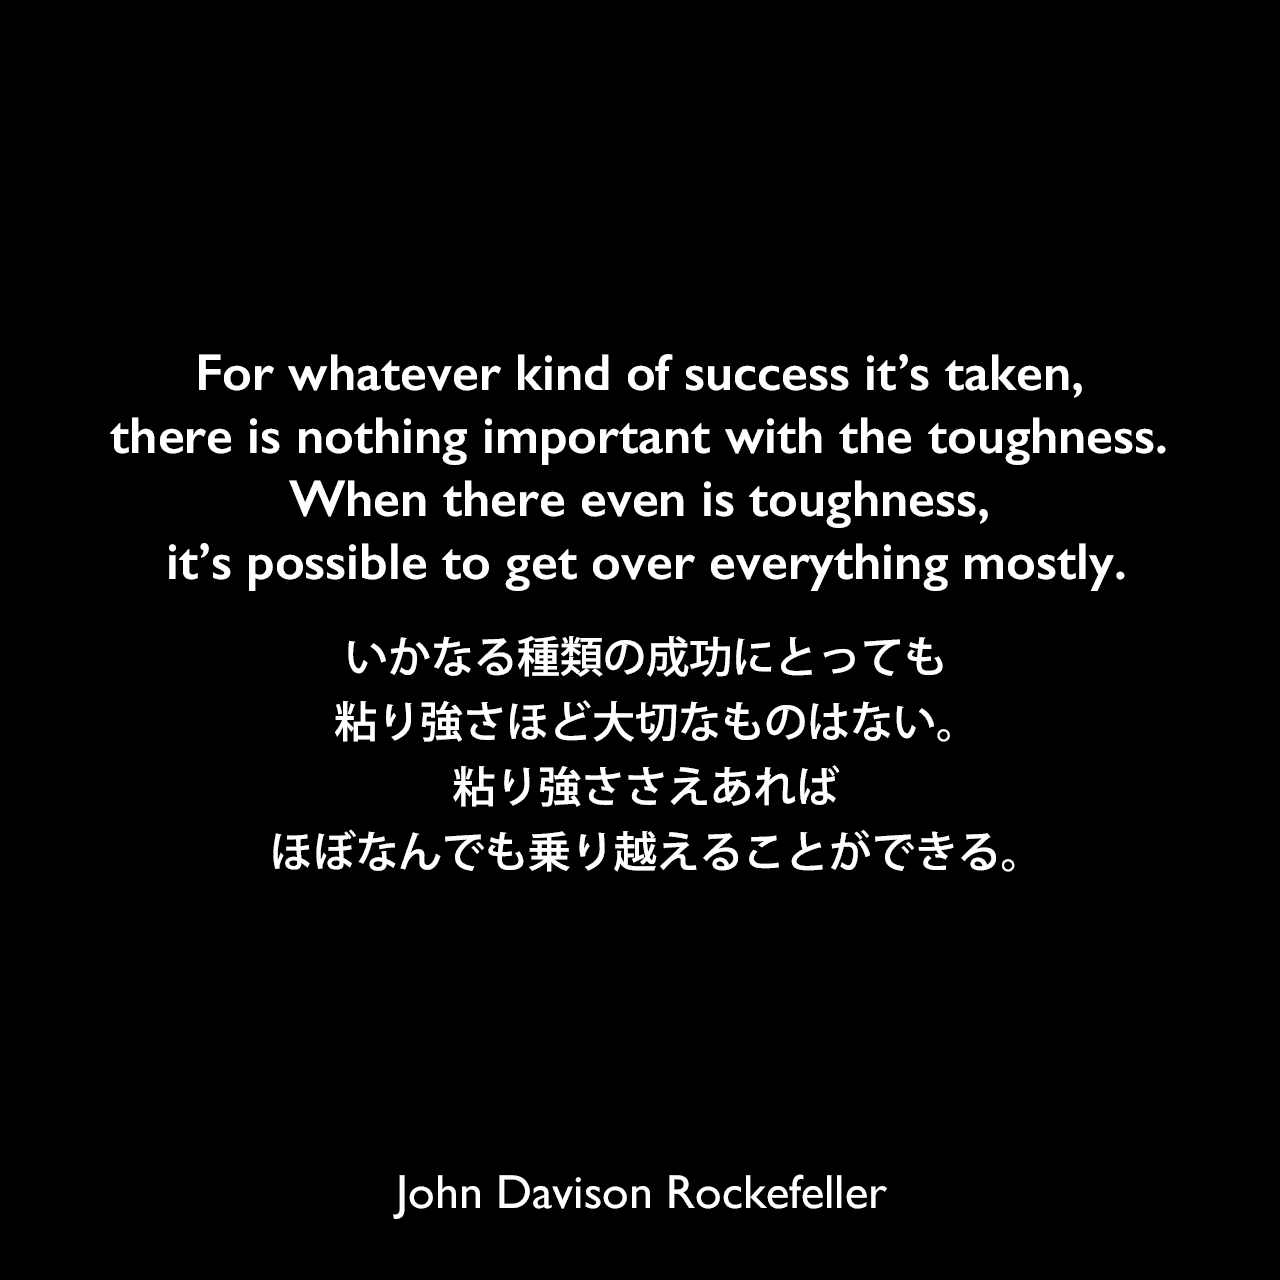 For whatever kind of success it’s taken, there is nothing important with the toughness. When there even is toughness, it’s possible to get over everything mostly.いかなる種類の成功にとっても粘り強さほど大切なものはない。粘り強ささえあれば、ほぼなんでも乗り越えることができる。John Davison Rockefeller